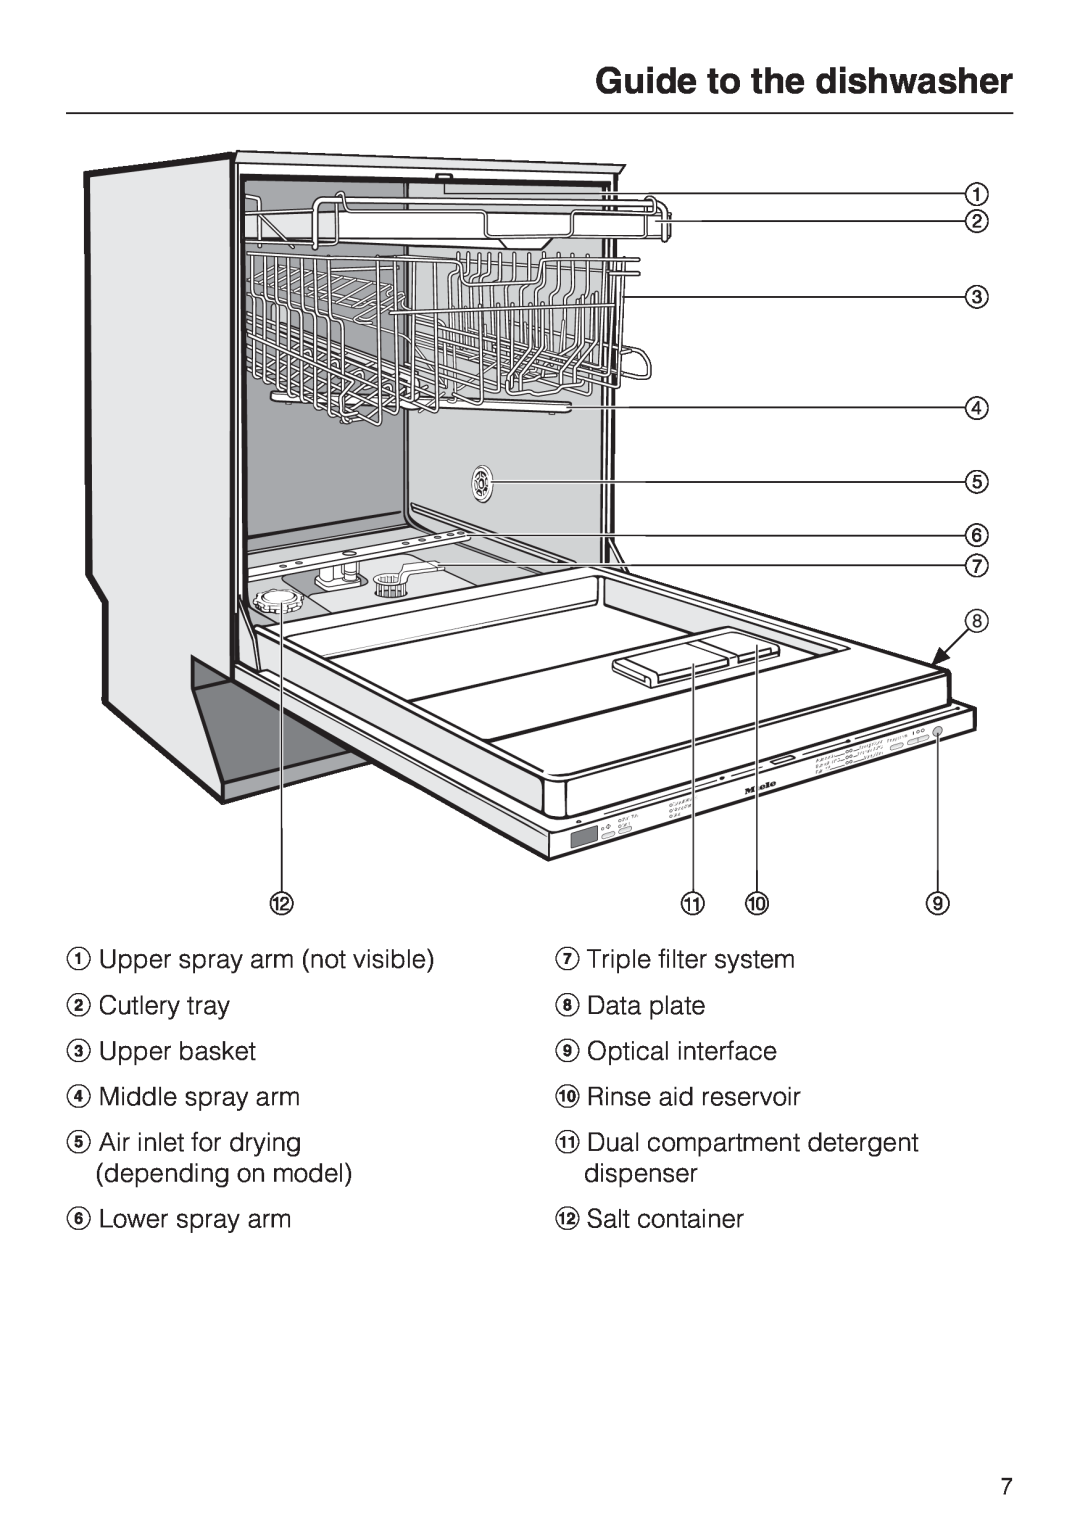 Miele G 1262 manual Guide to the dishwasher, Upper spray arm not visible Cutlery tray, Upper basket Middle spray arm 